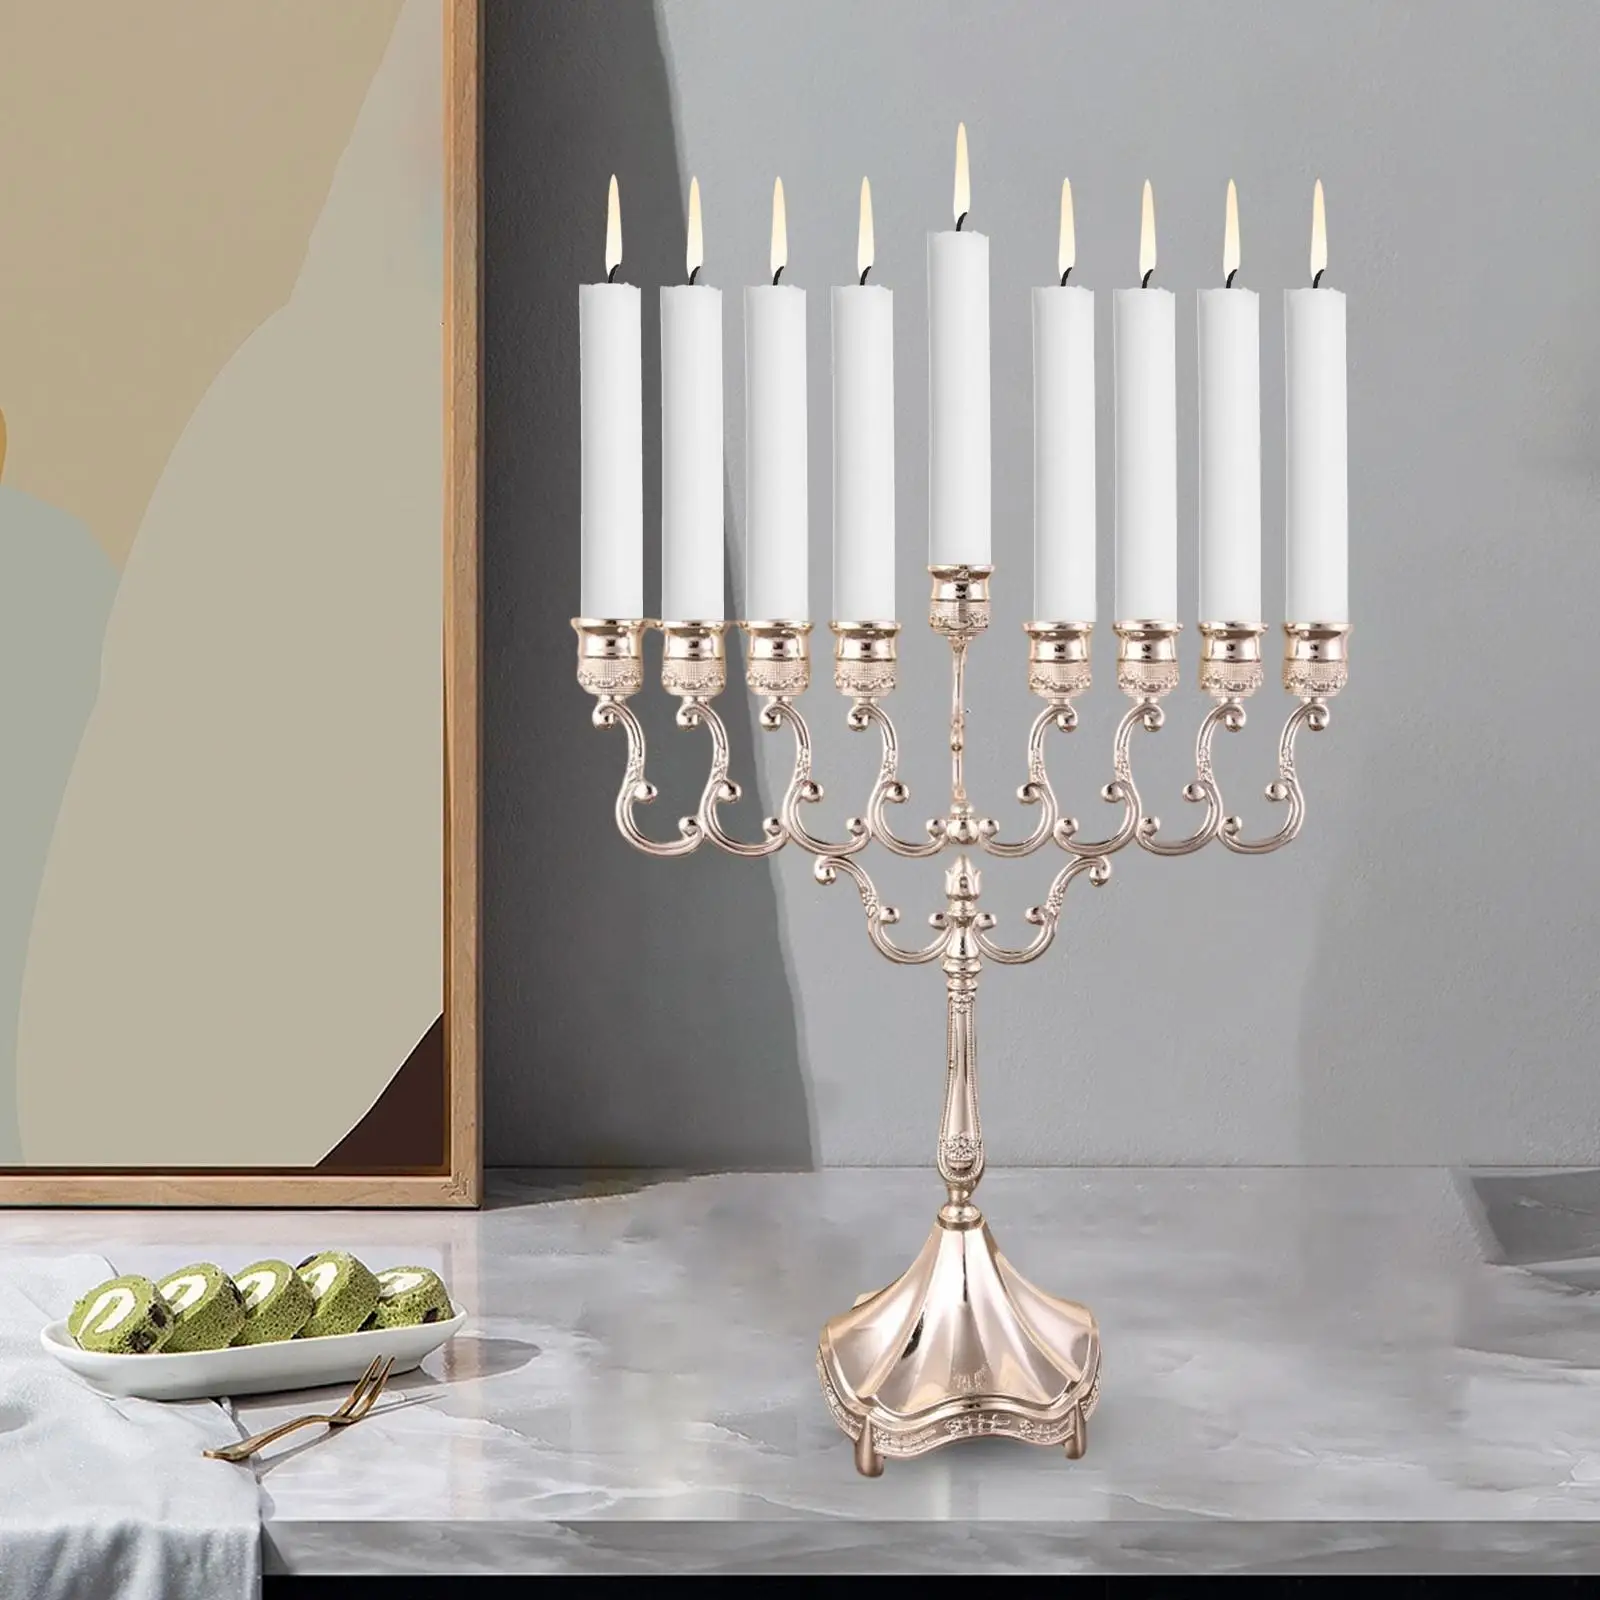 9 Branches Candle Holder Tabletop Candelabrum Candle Stands Hanukkah Menorah for Christmas Party Wedding Home Decor Gift